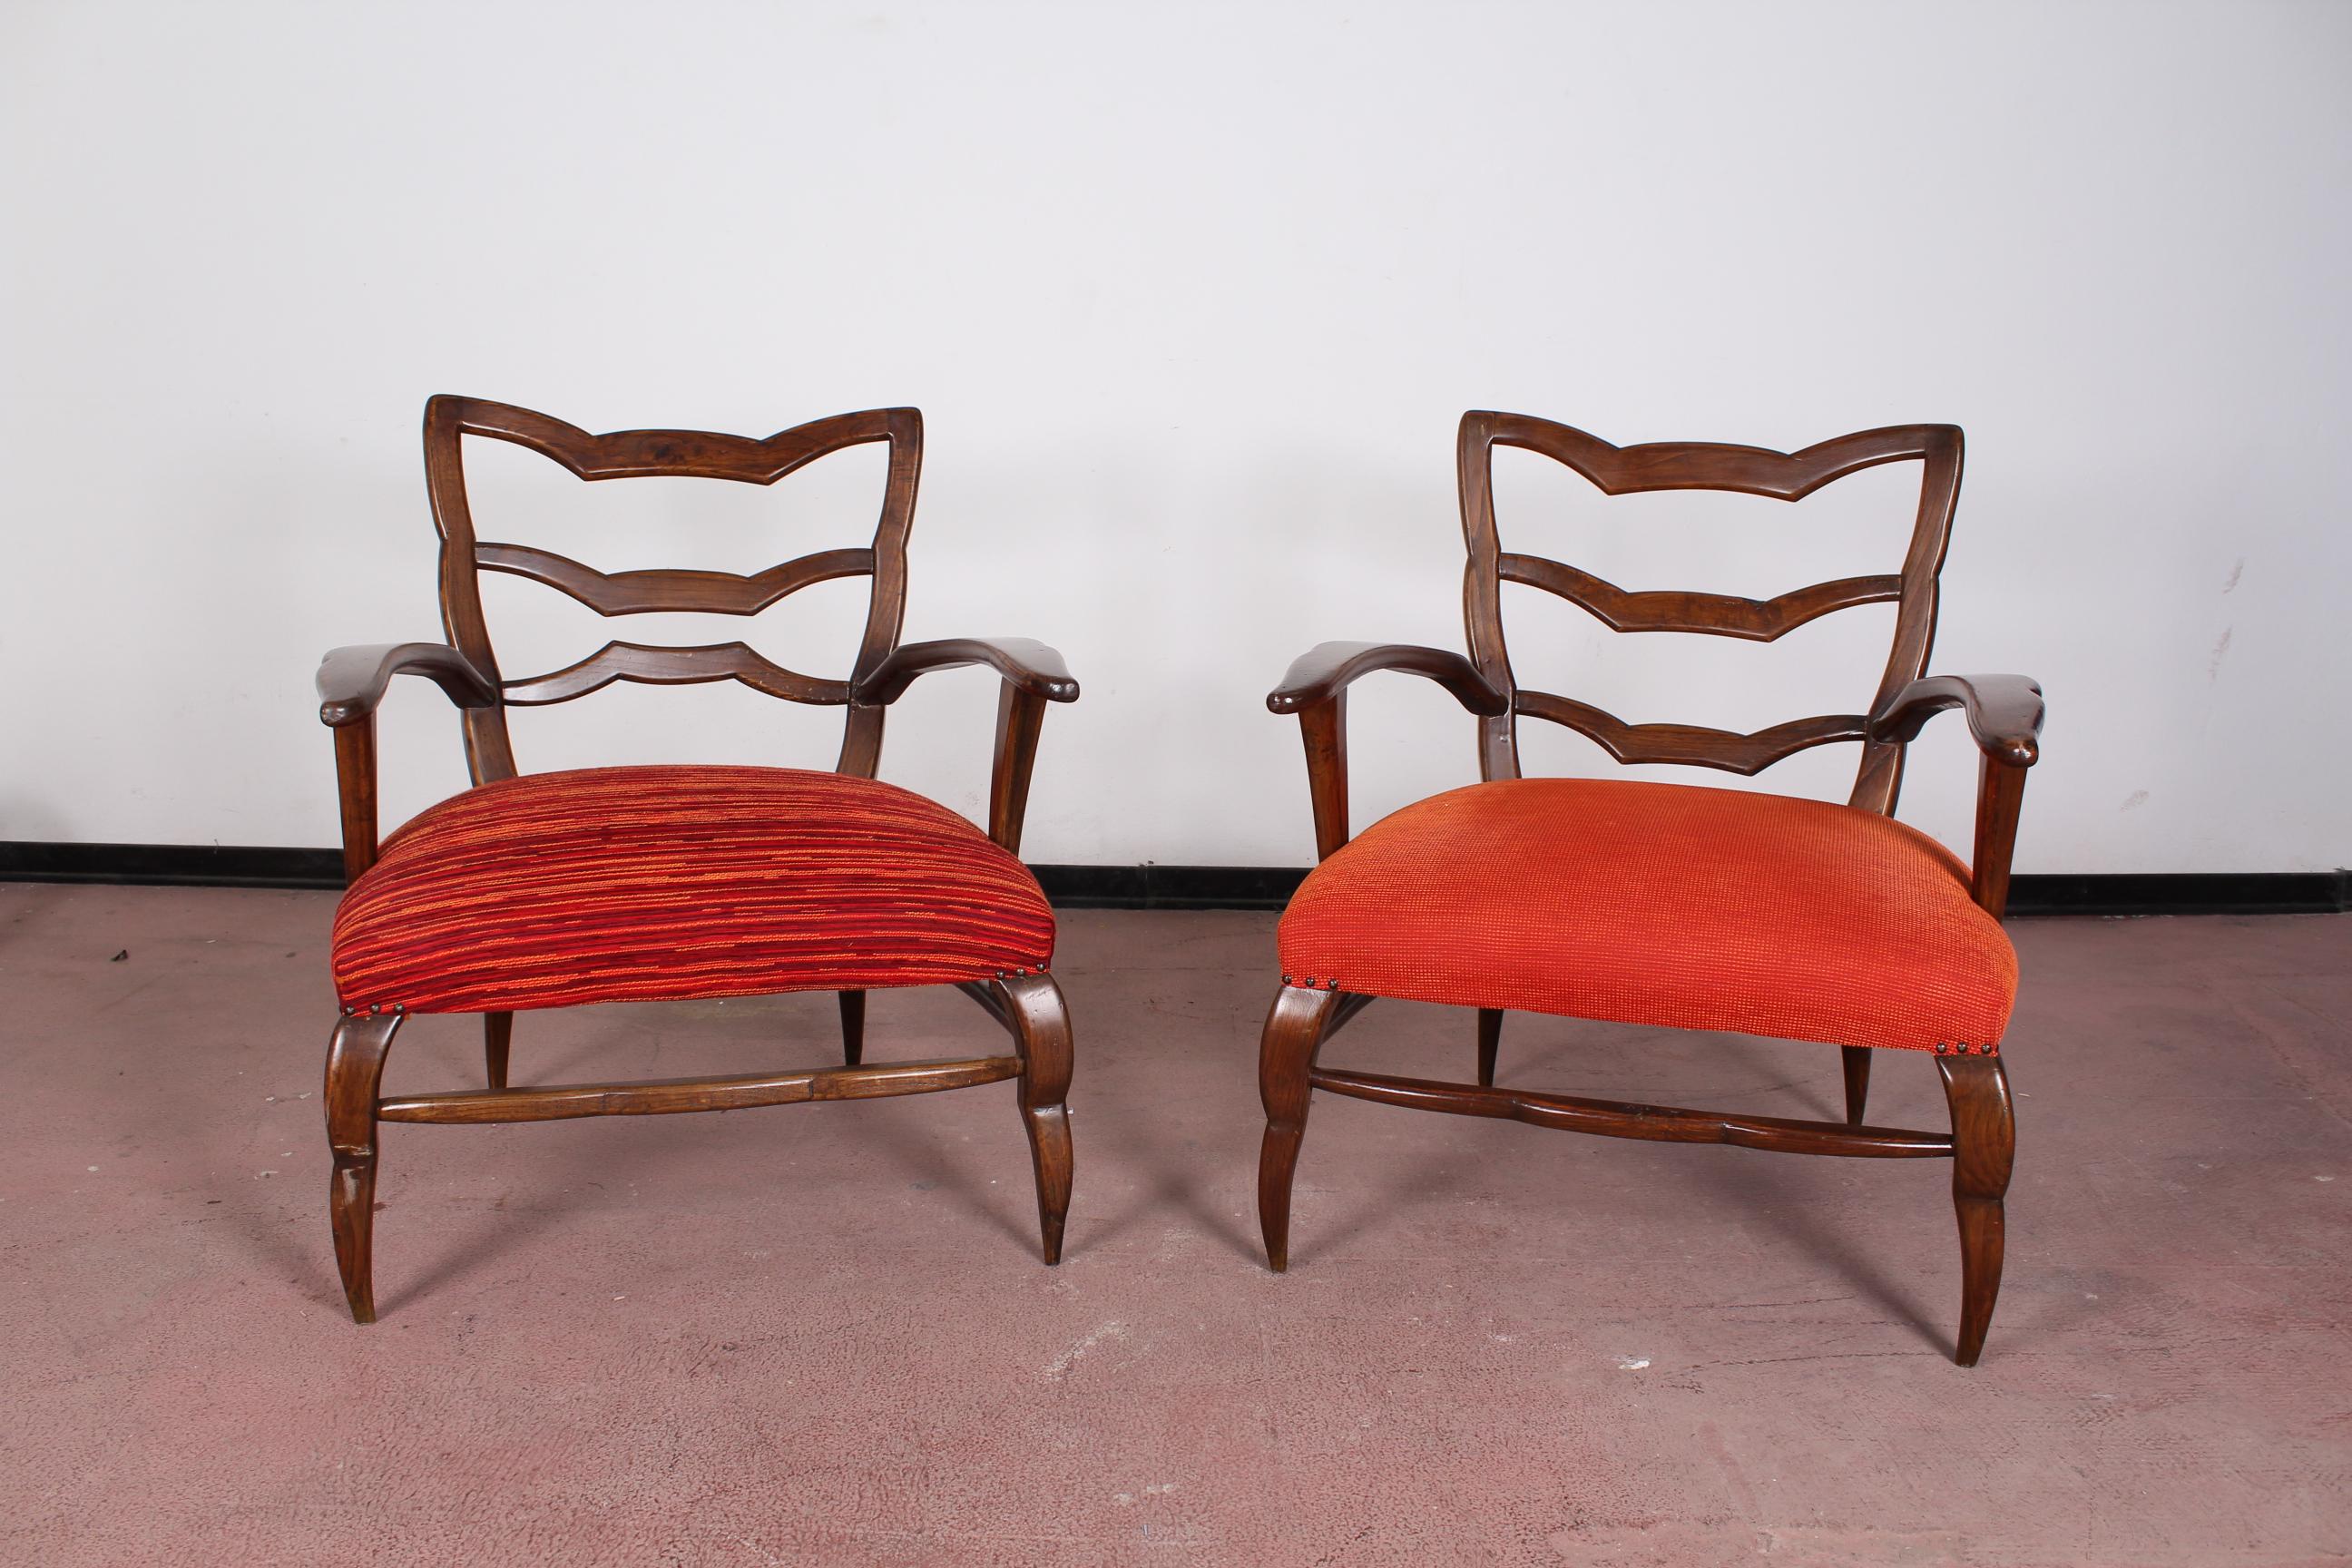 Pair of armchairs attributed to Paolo Buffa, Italy, circa 1940. Stylish original and particular armchairs with carved wooden arms, recently completely restored and reupholstered in Modern coordinated fabric.